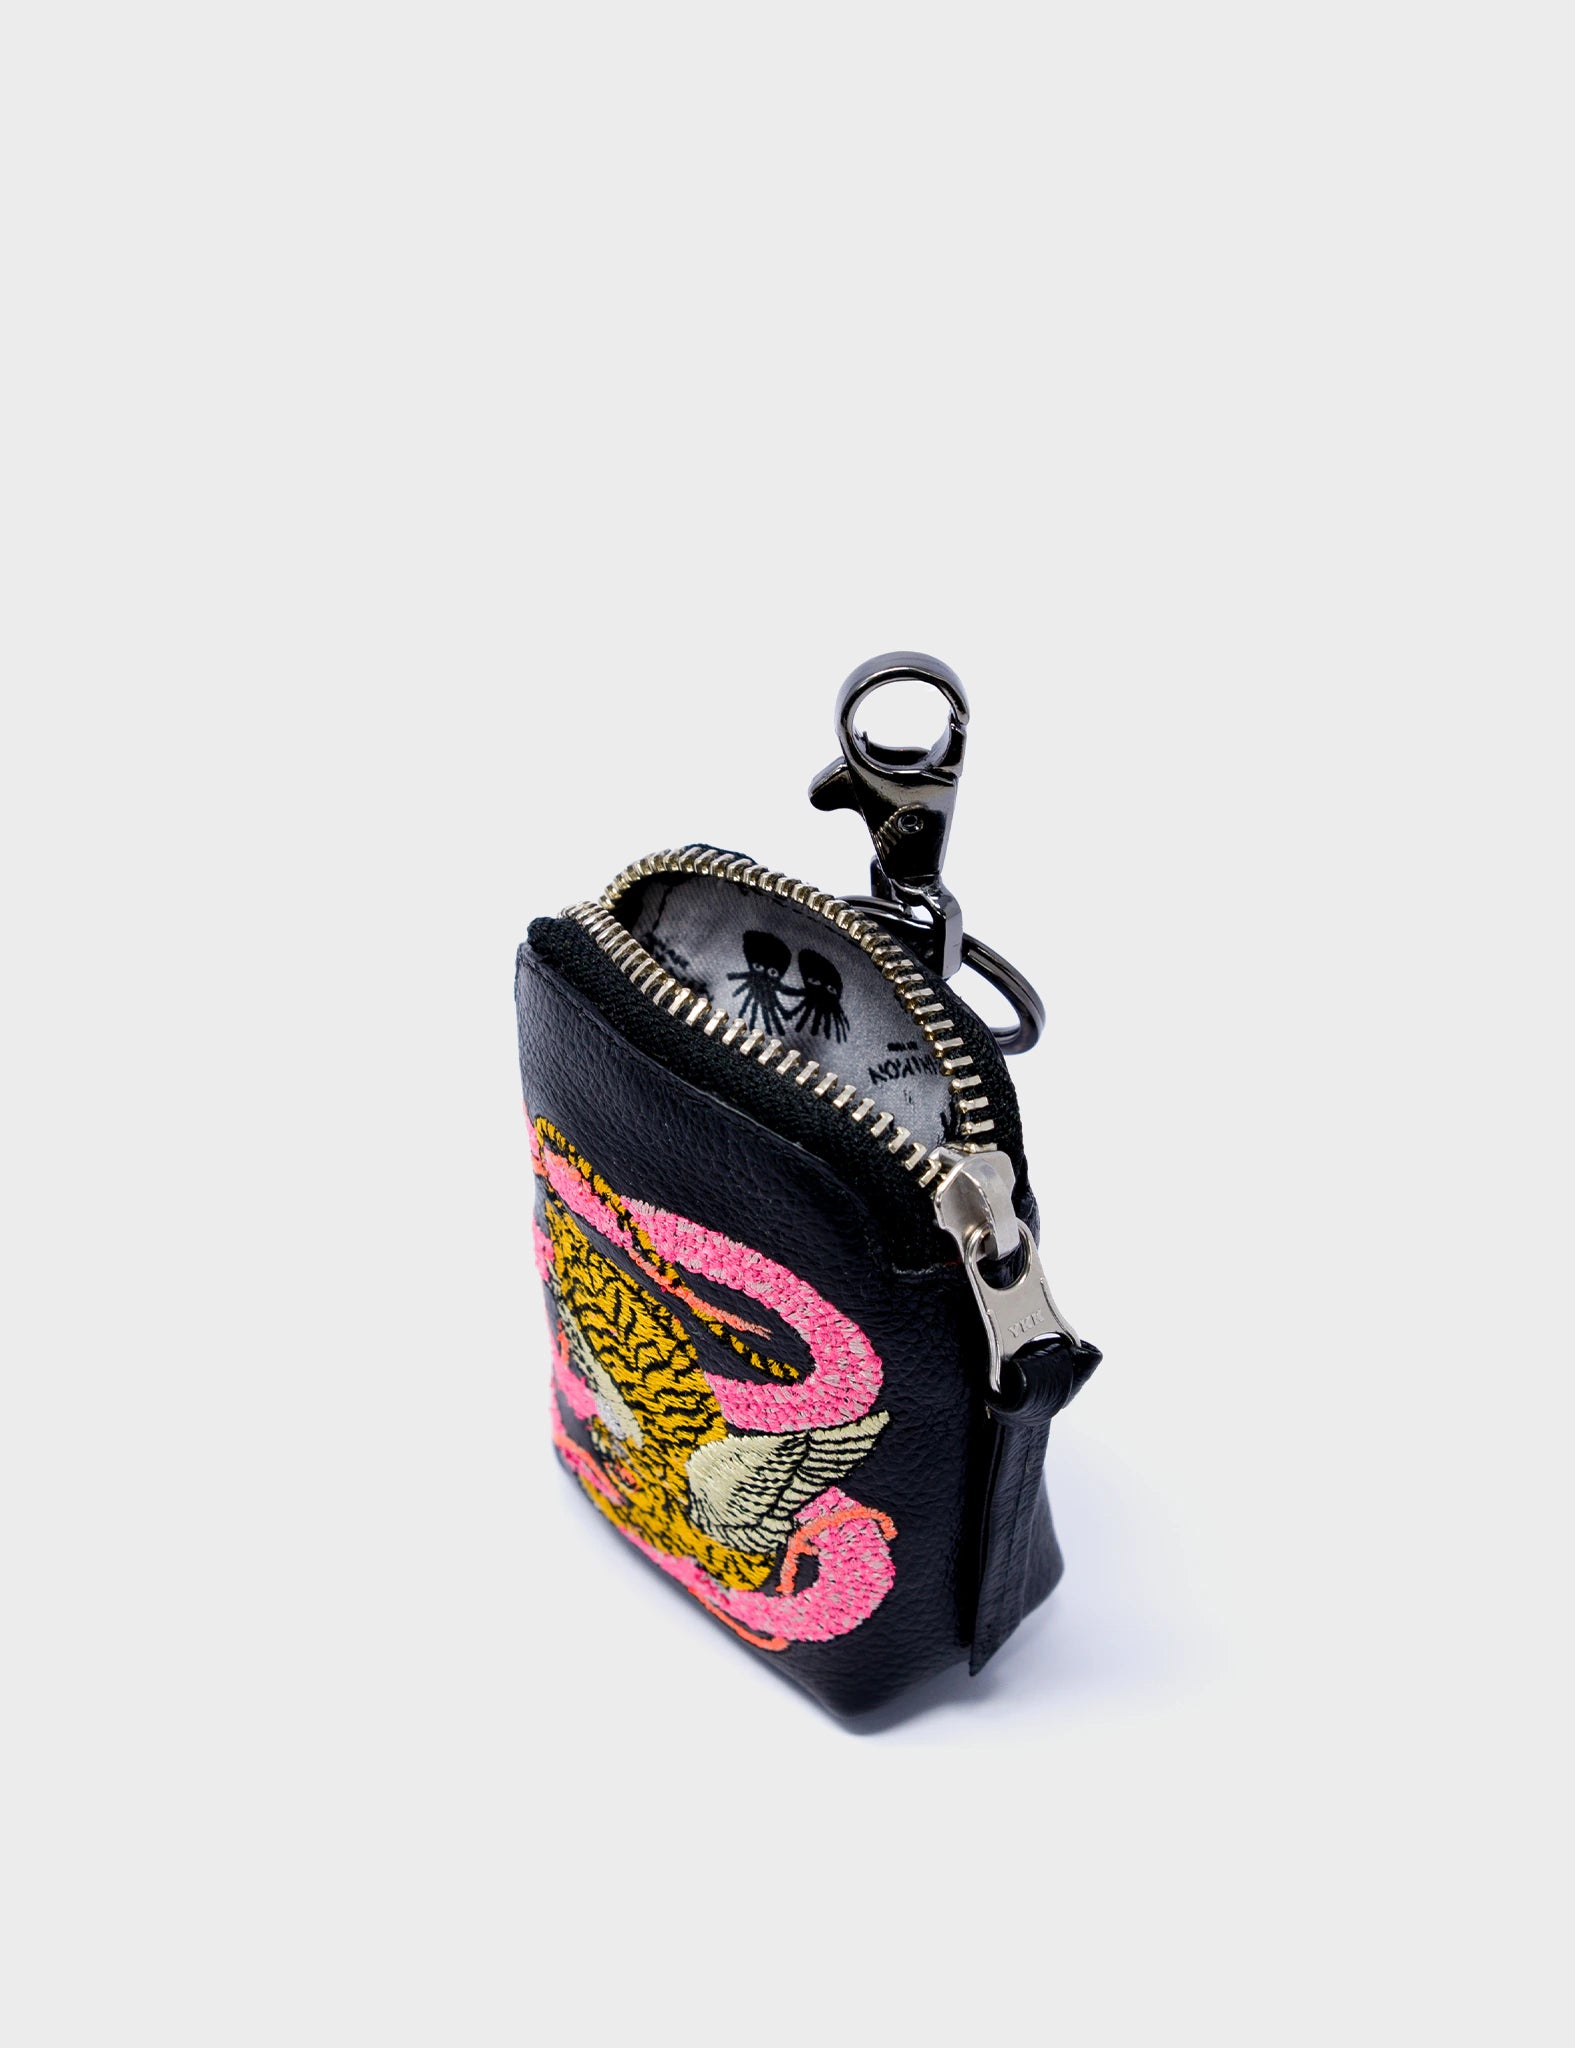 Pouch Charm - Black Leather Keychain Tiger and Snake Print - side 